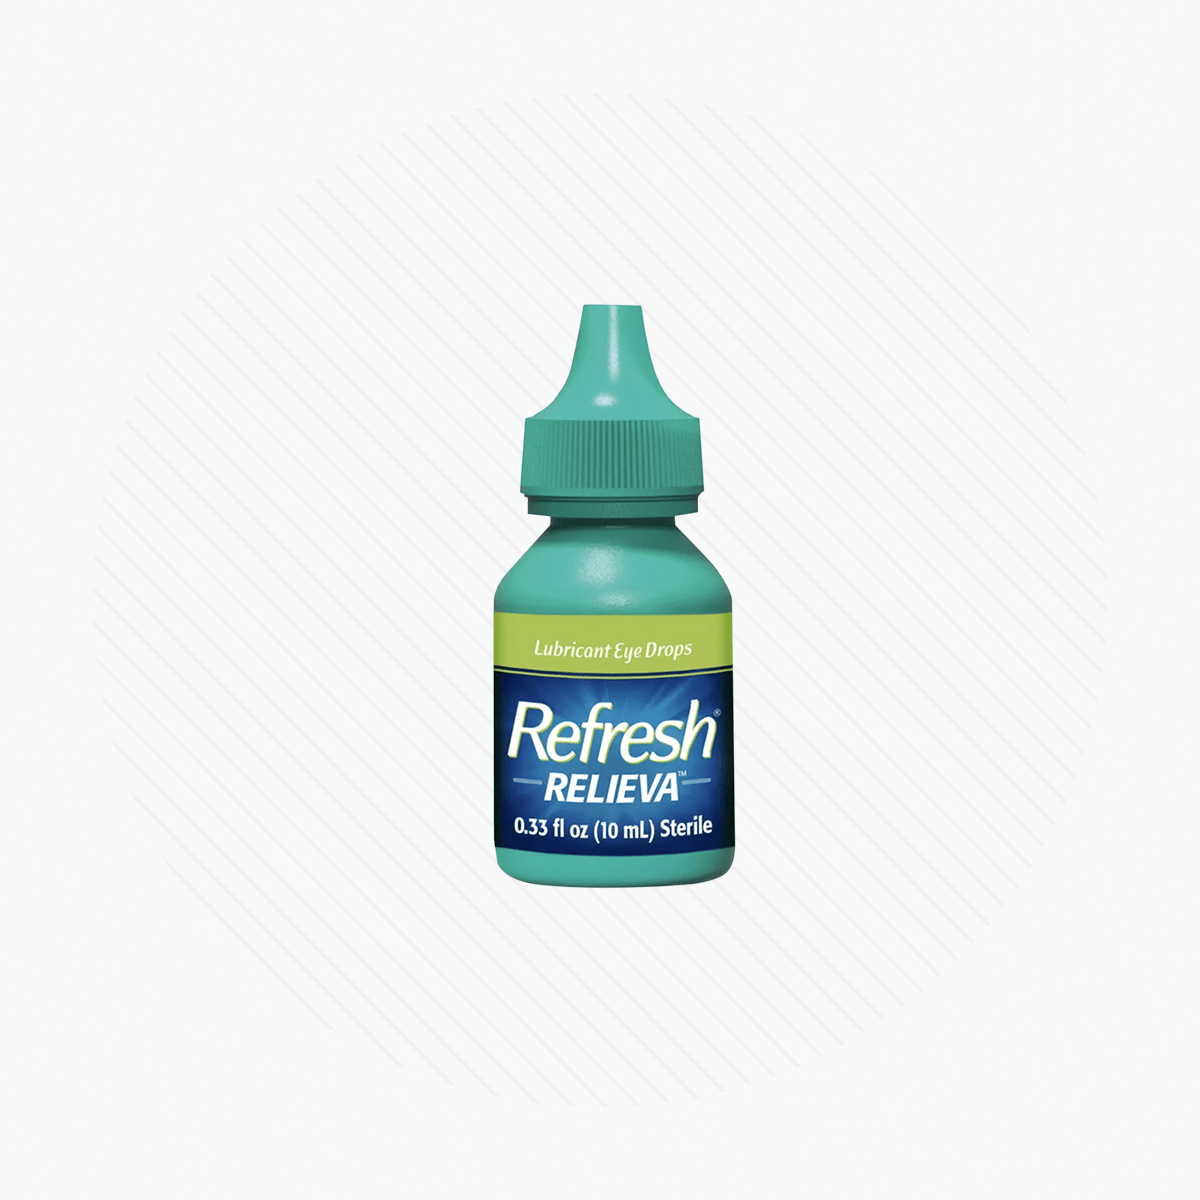 Refresh Relieva Eye Drops to relieve discomfort due to dry, irritated eyes (10mL) - Dryeye Rescue